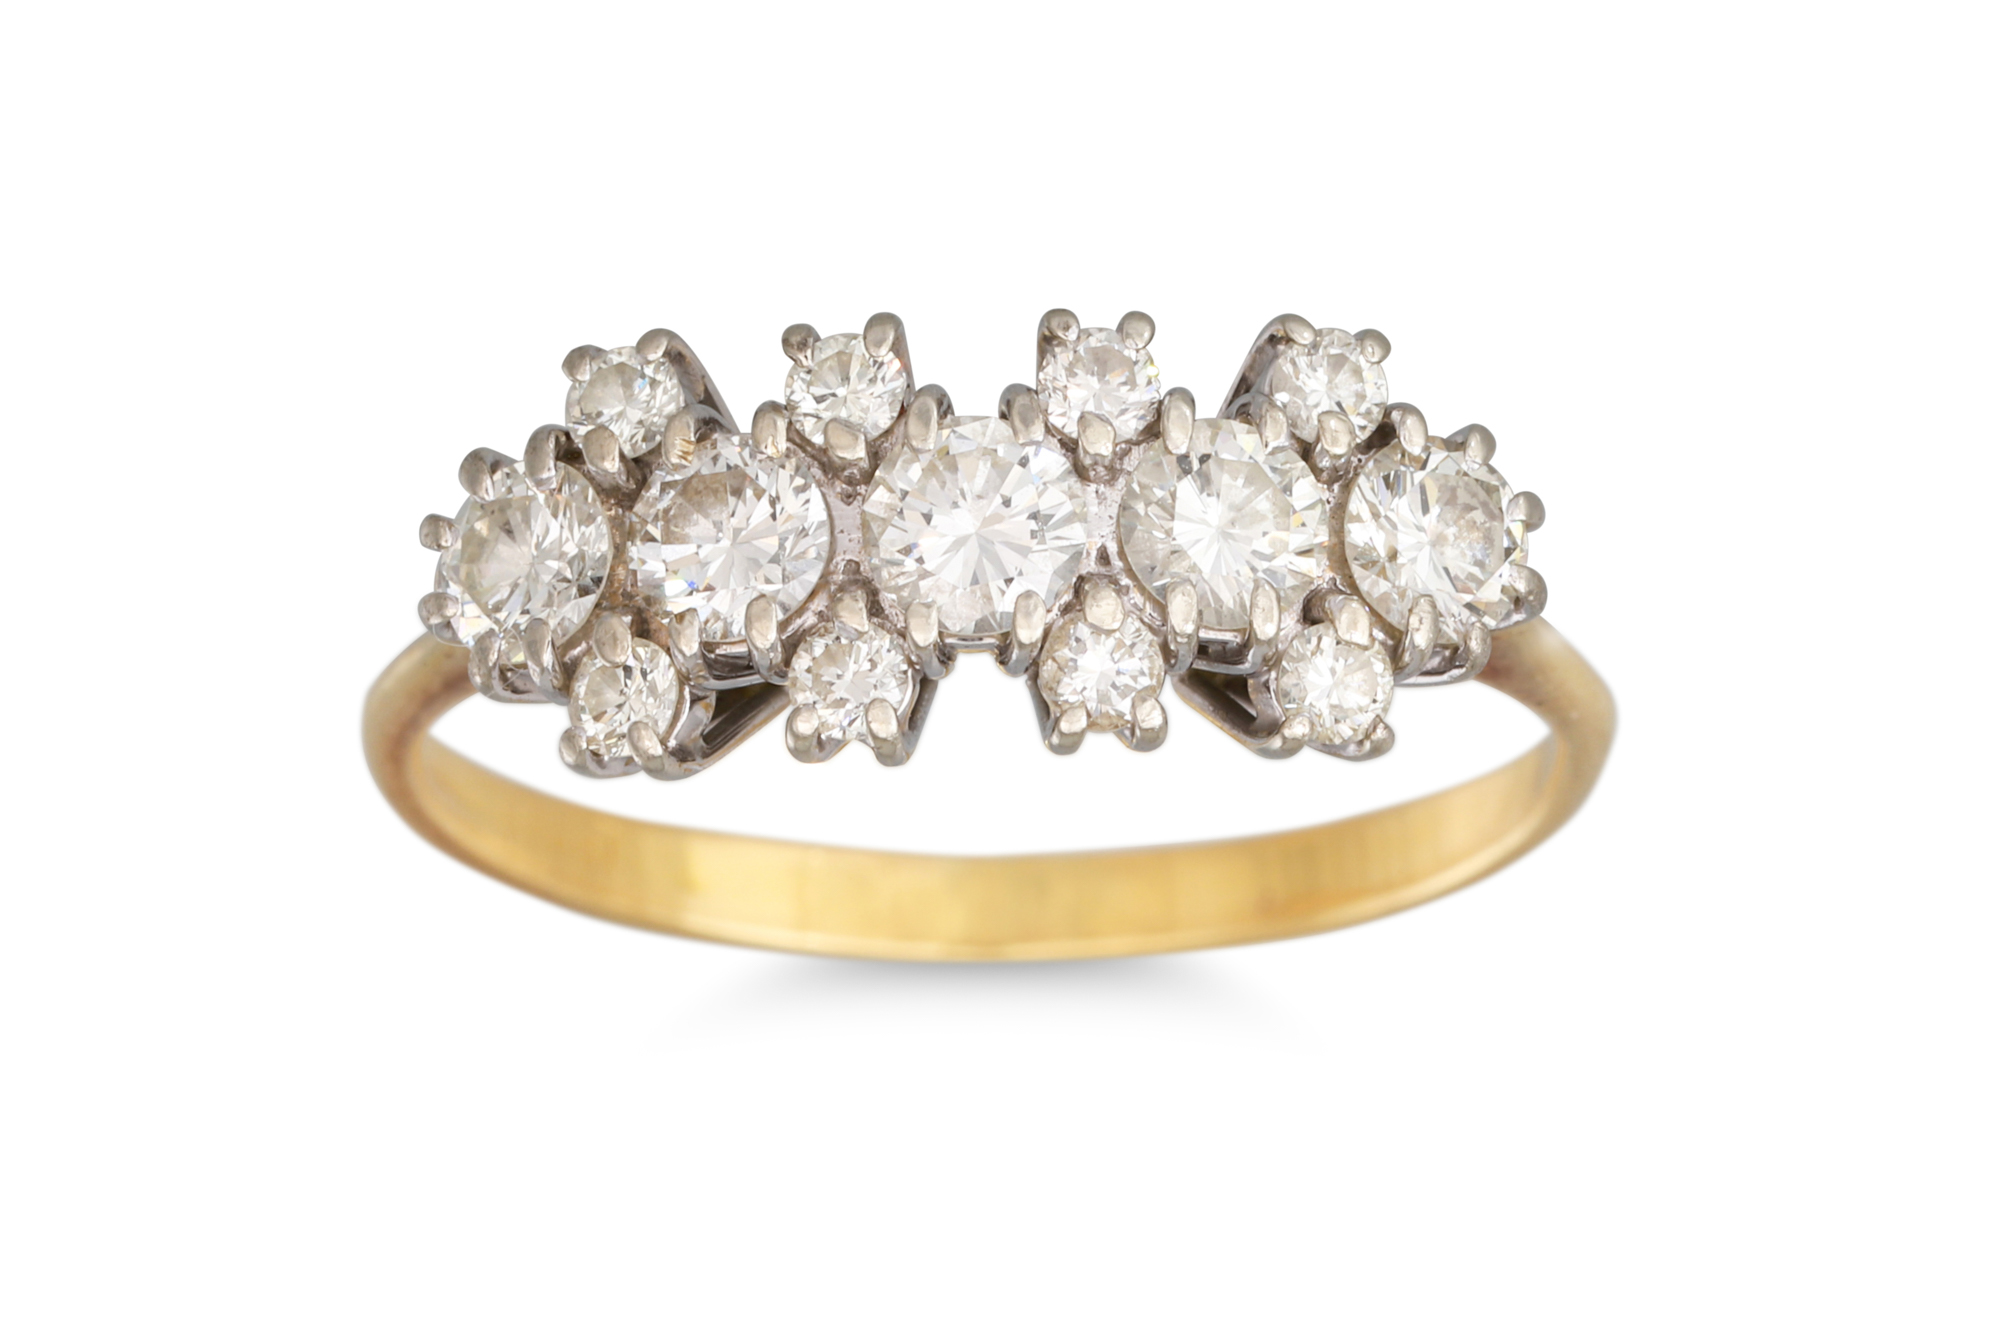 A DIAMOND CLUSTER RING, set with brilliant cut diamonds, mounted in 18ct yellow gold. Estimated: